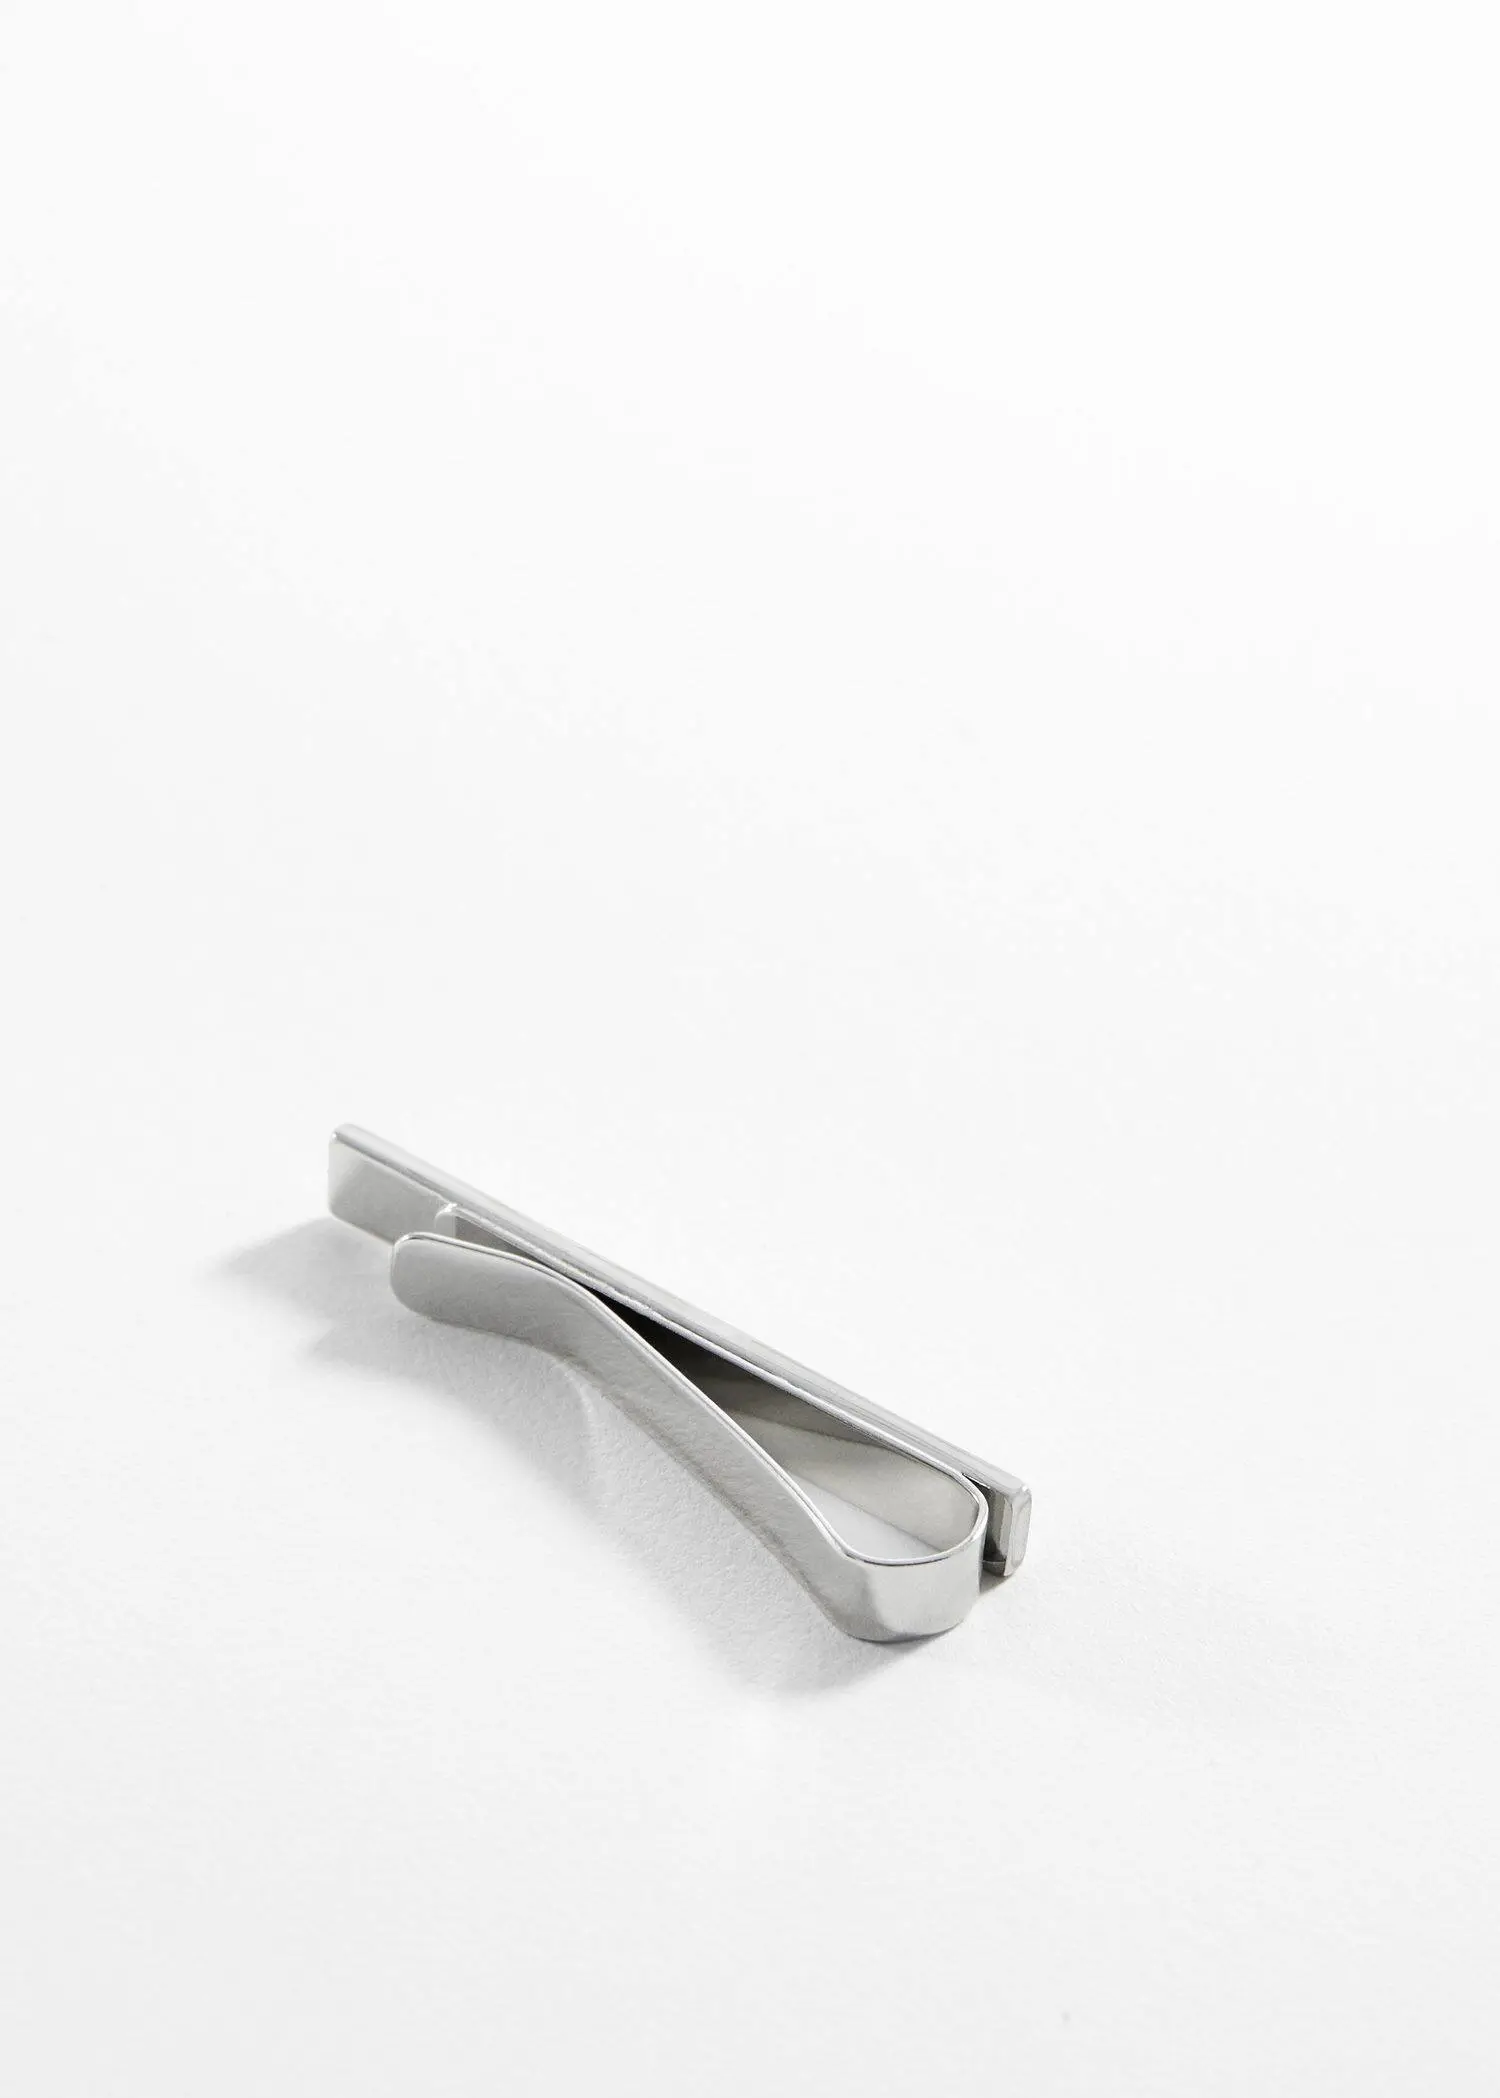 Mango Metal tie clip. a metal object sitting on top of a white surface. 